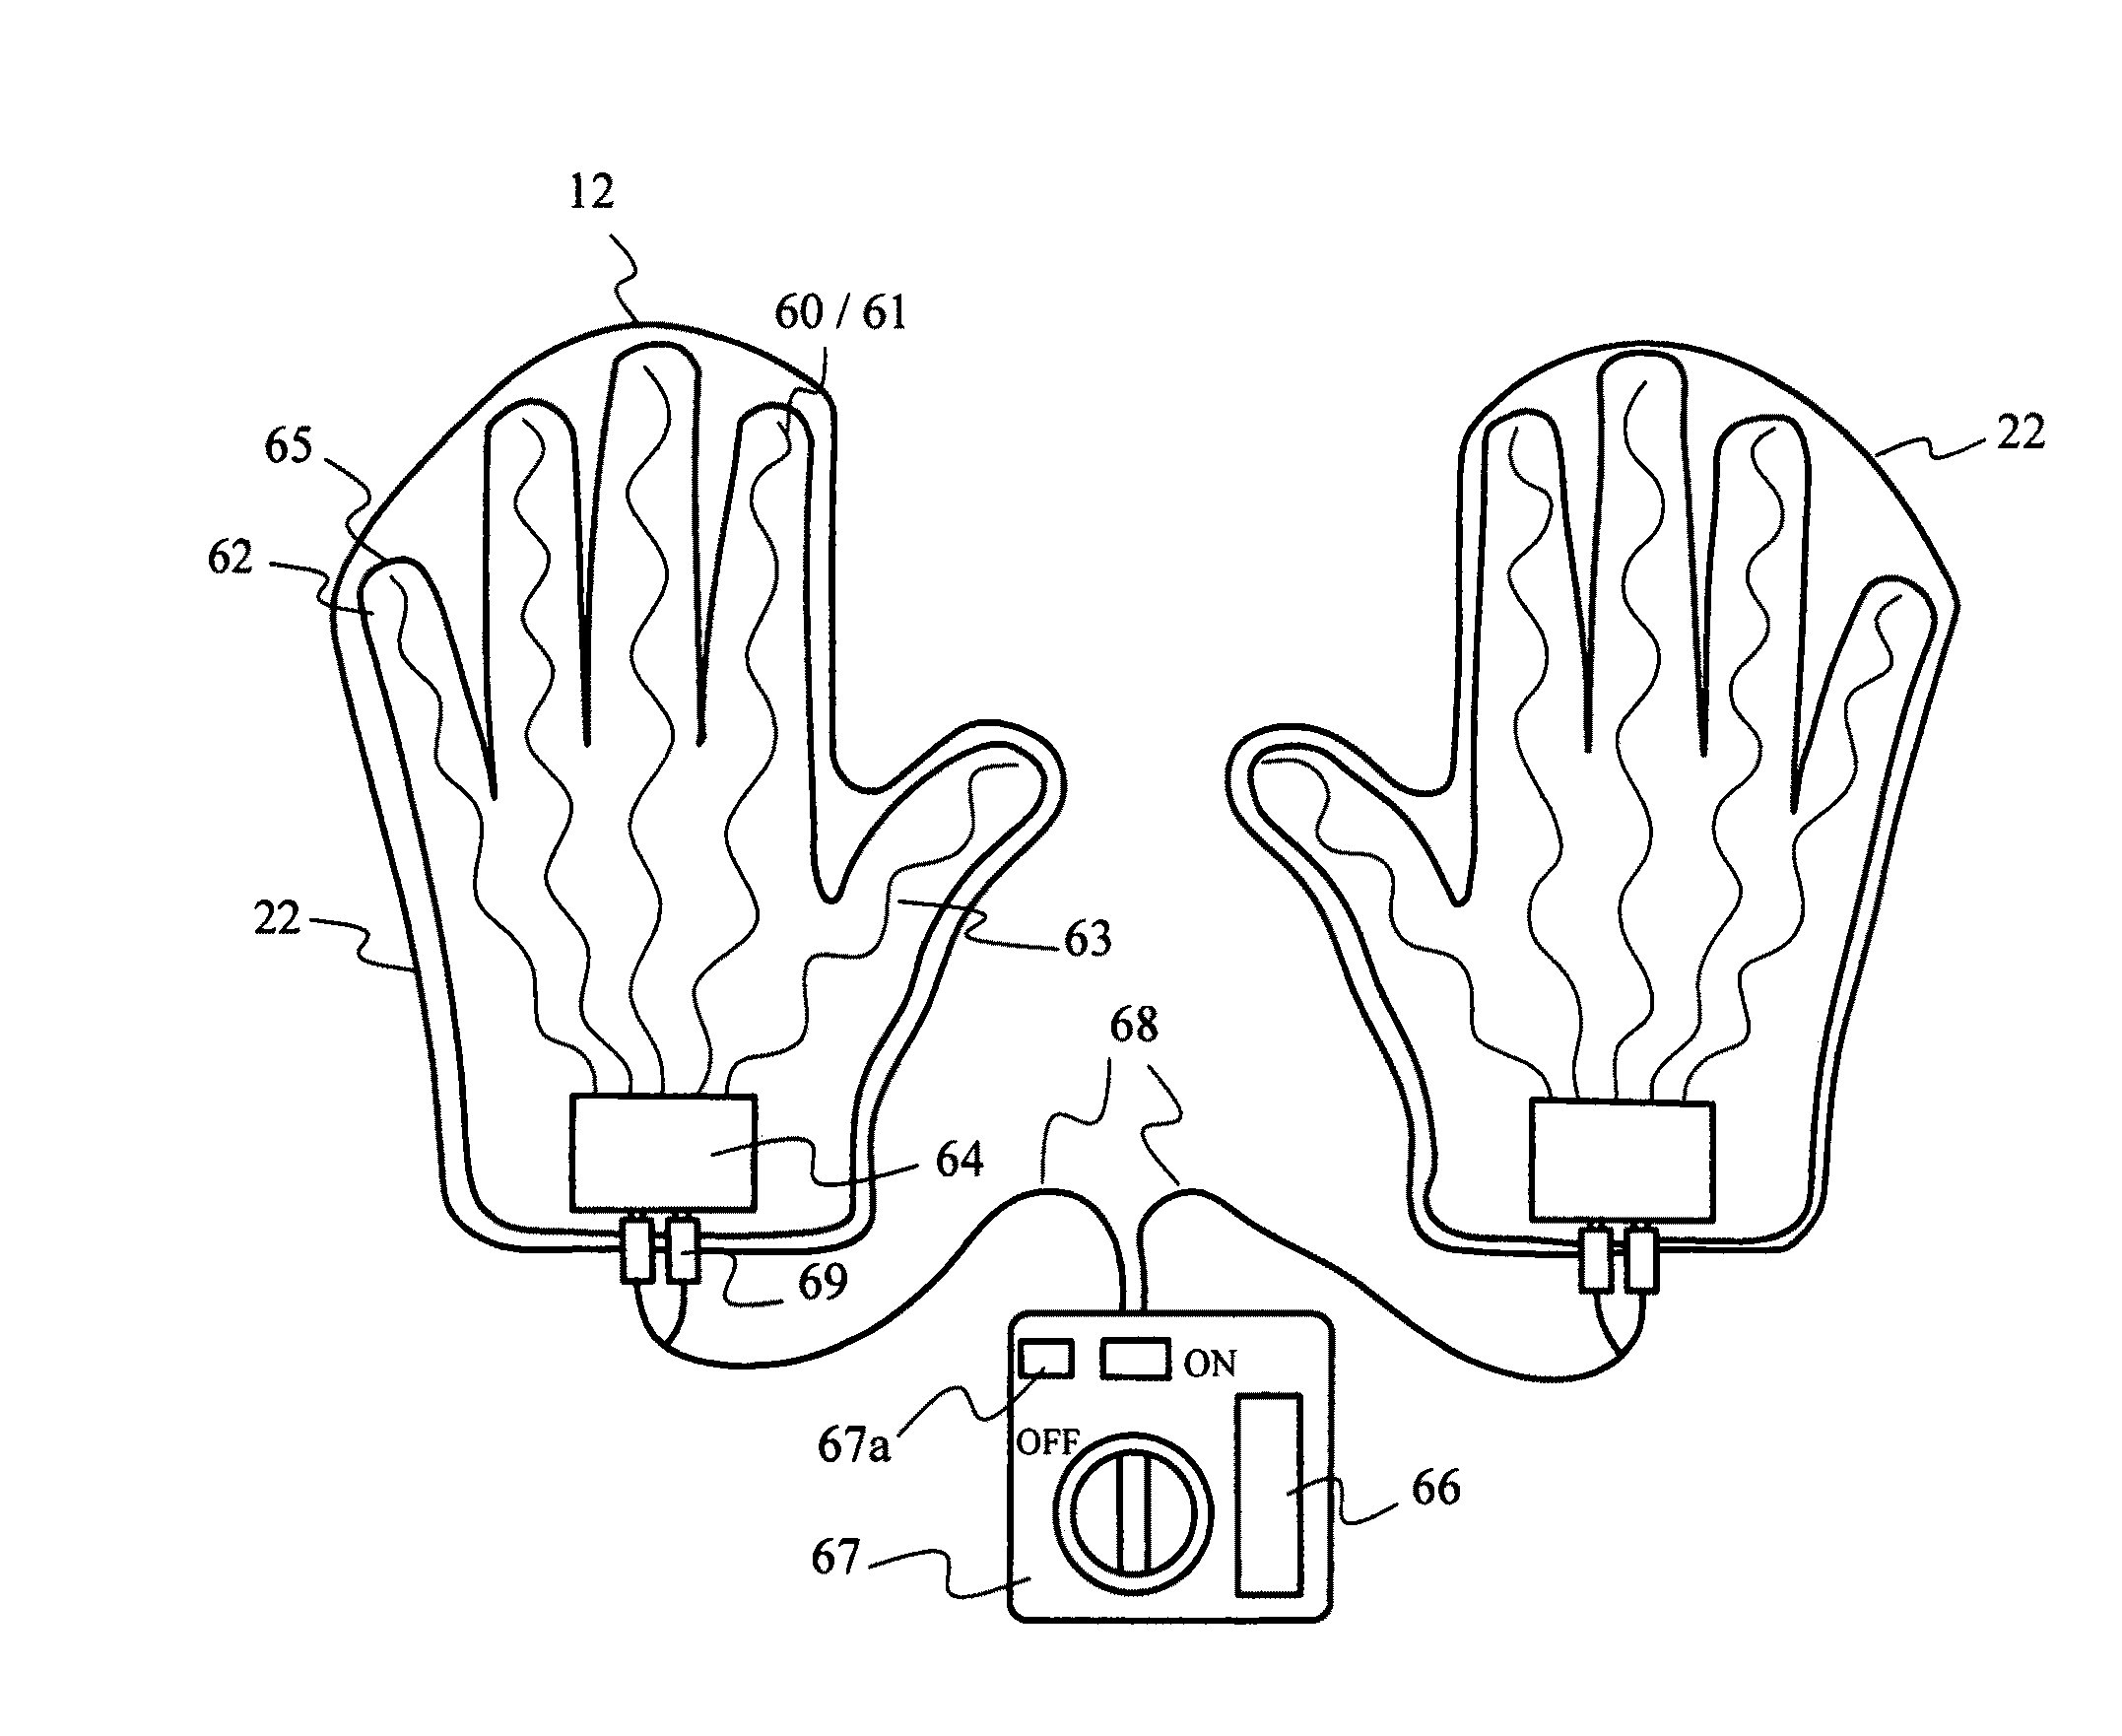 Therapeutic device that provides stimulation to an immobilized extremity